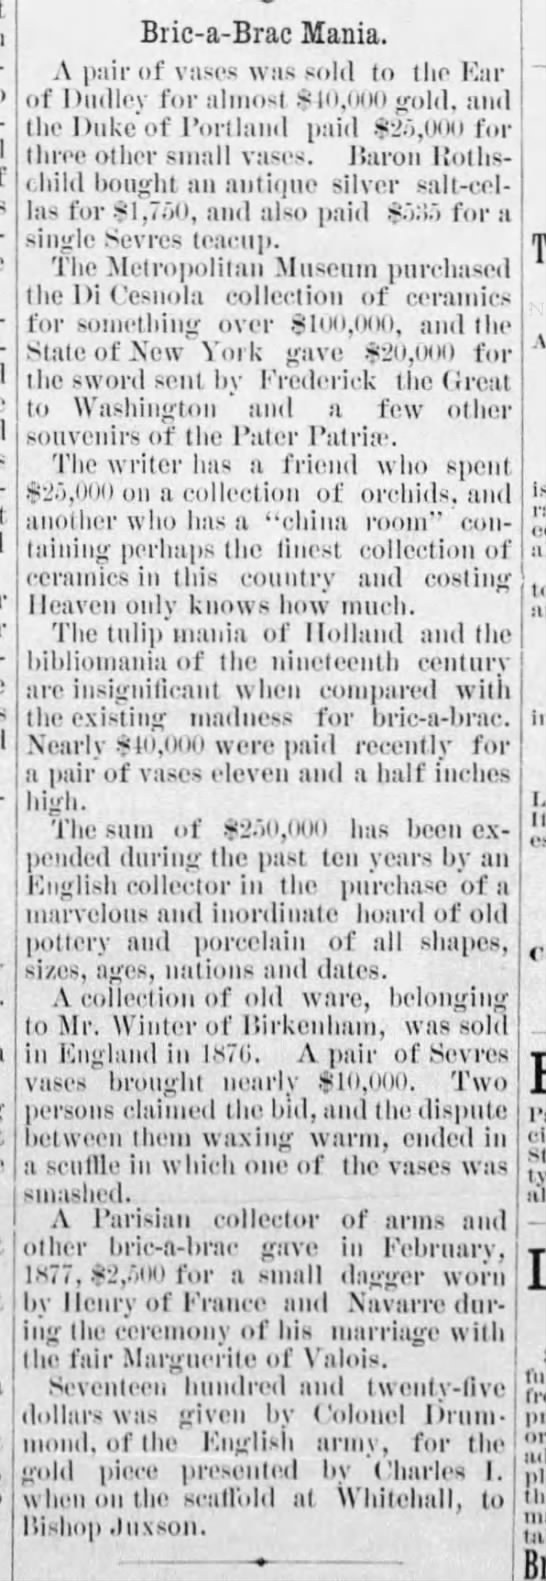 High prices being paid for bric-a-brac, 1887 - 